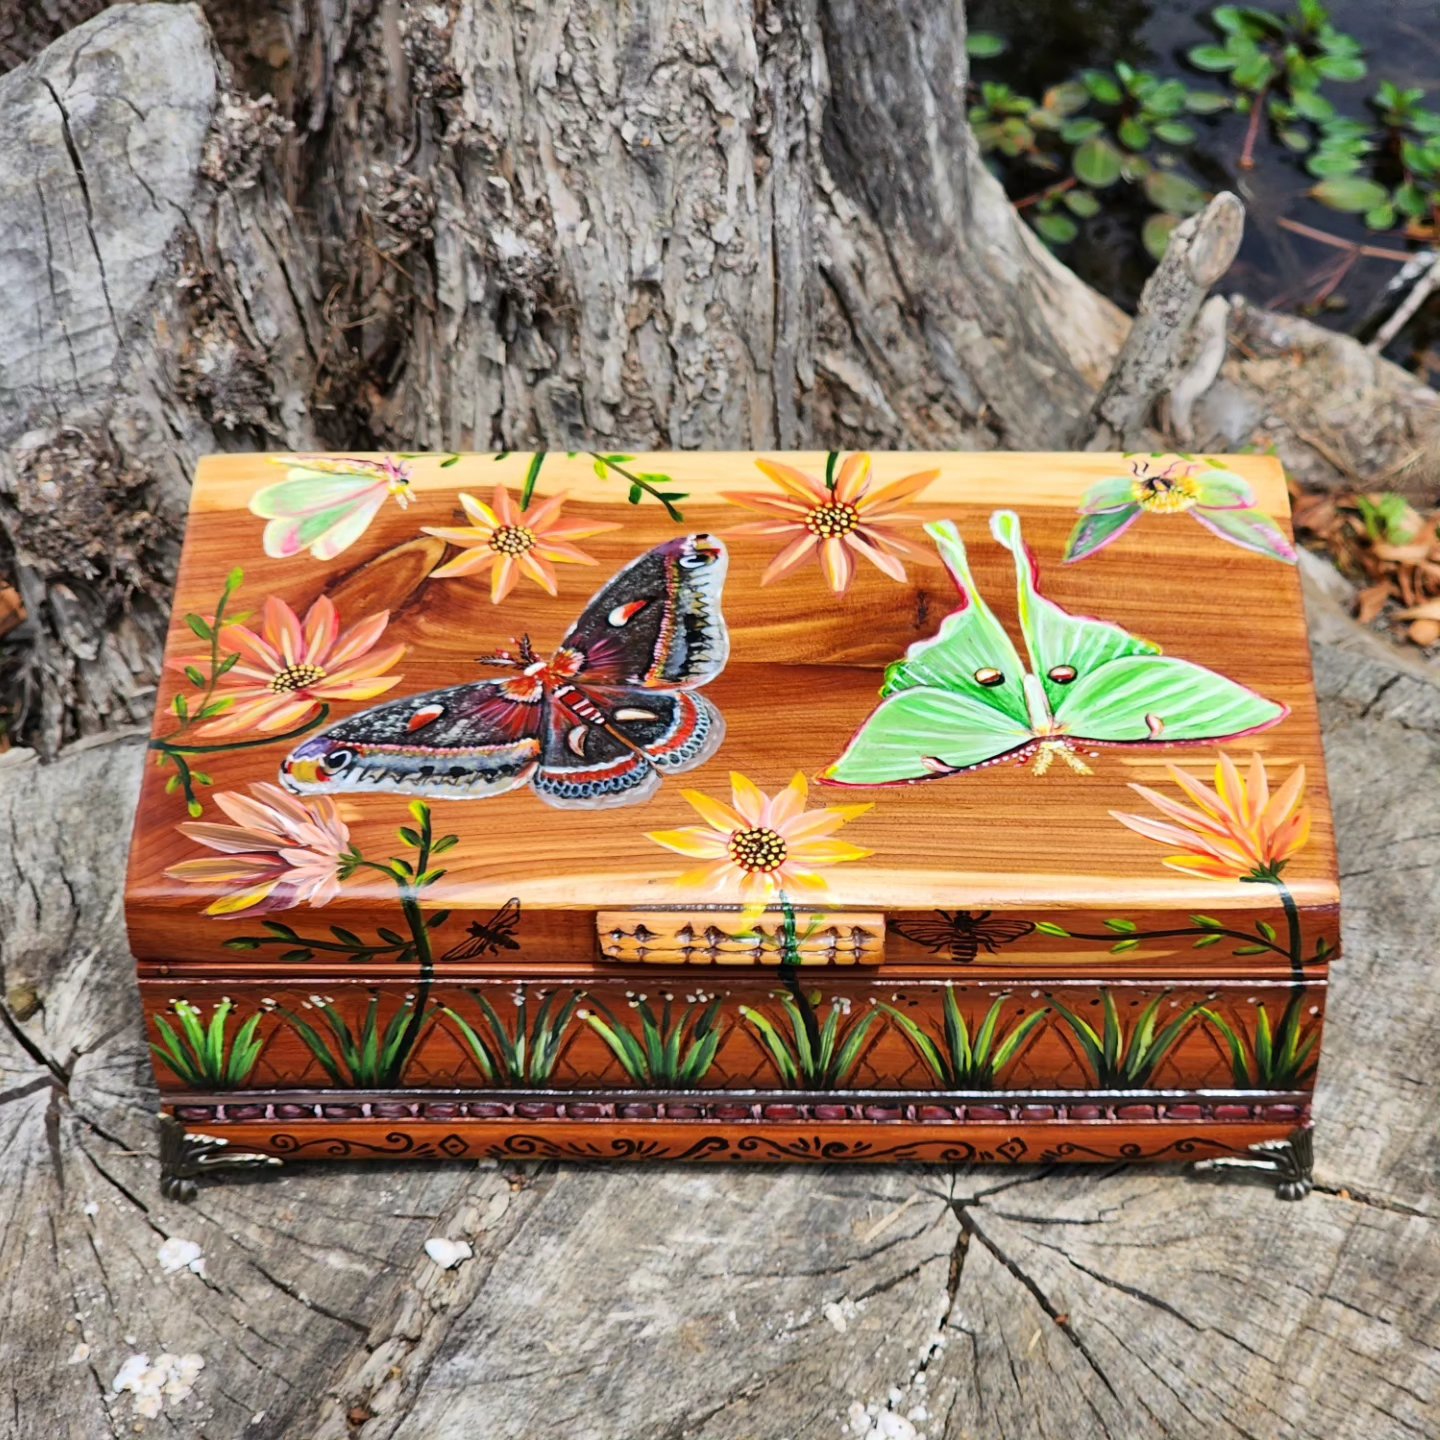 Handpainted antique wooden jewelry box with original design of moths and flowers. Beautiful handpainted wooden trinket box with a mirror. This cute trinket box is an ideal gift for a special loved one. You can store jewelry such as rings, necklaces, bracelets, or anything you would like to keep in a particular place, especially in this elegant and artistic trinket box.